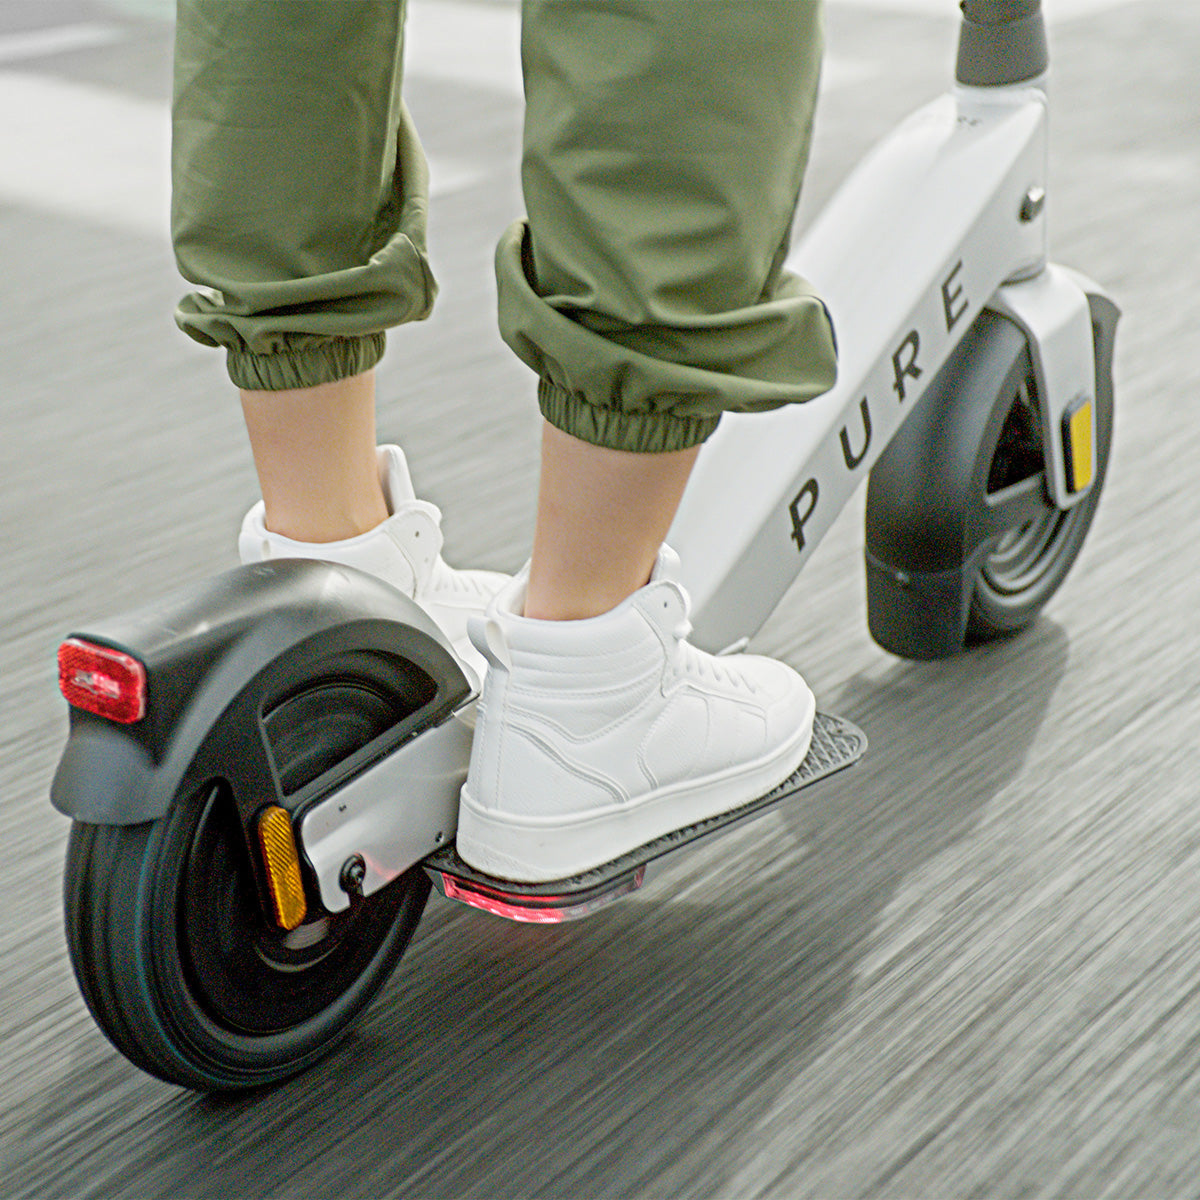 Pure Advance Electric Scooter - Light Grey